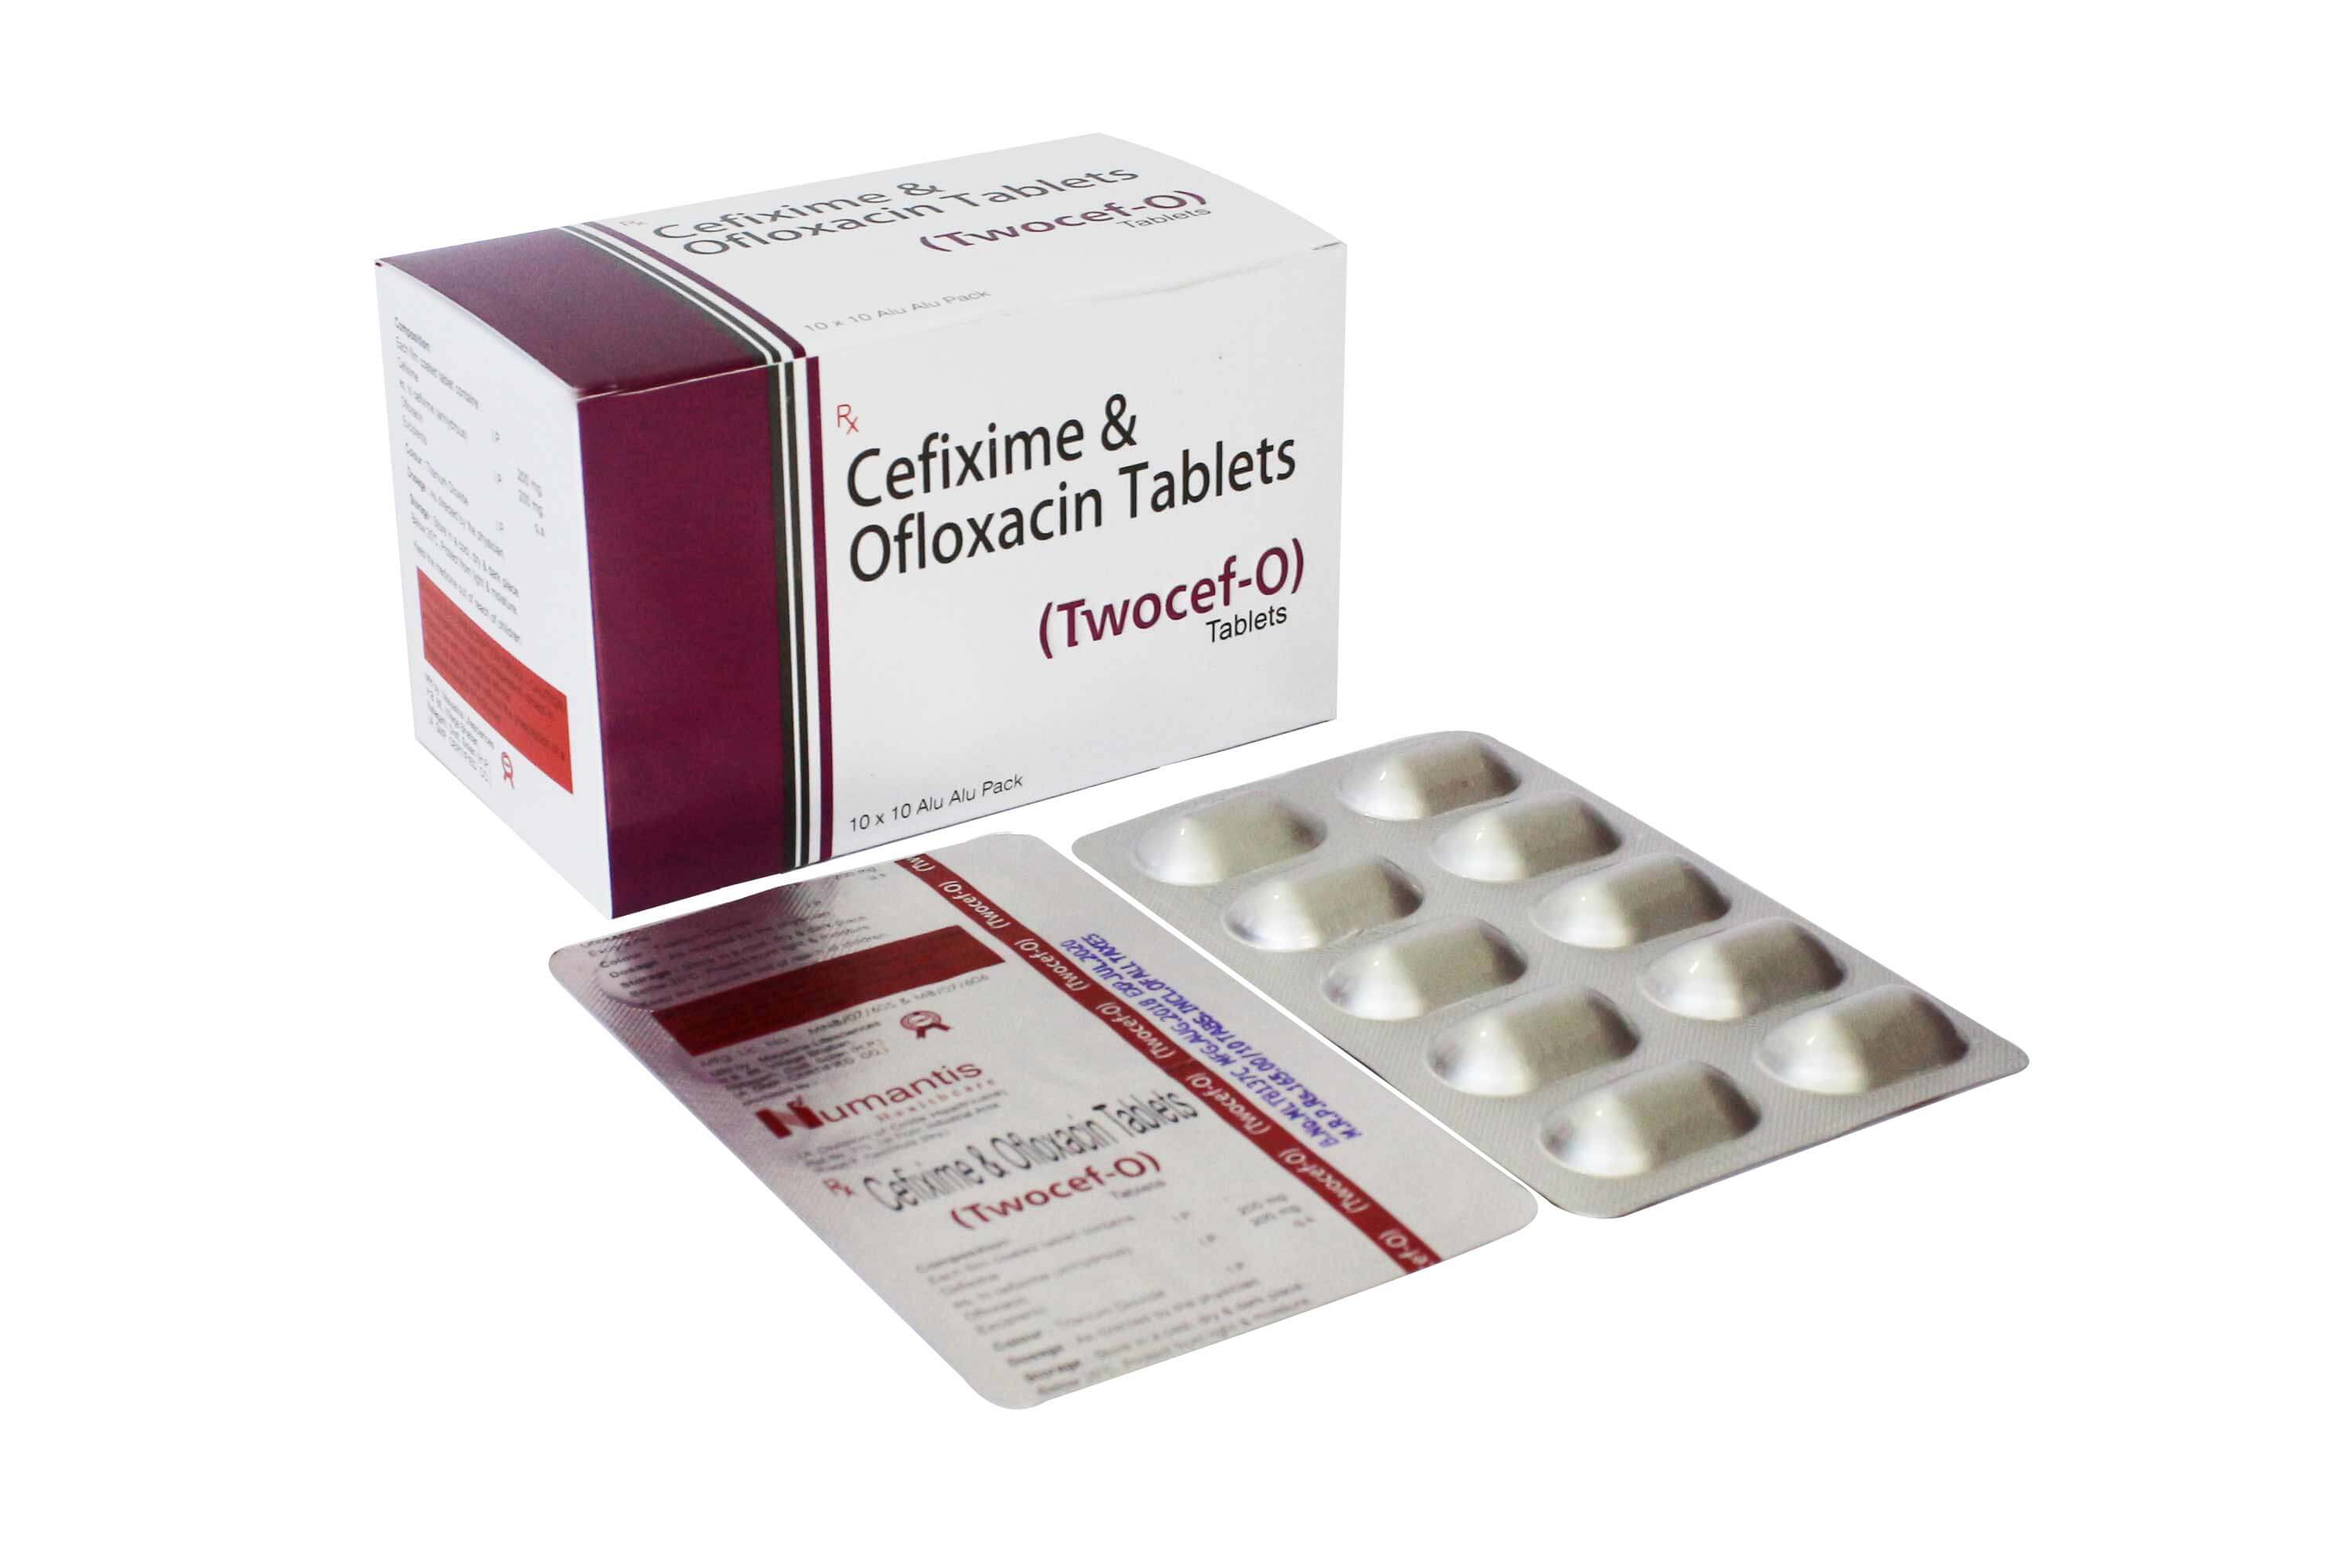 Product Name: Twocef O, Compositions of Twocef O are Cefixime & Oflaxain Tablets - Numantis Healthcare